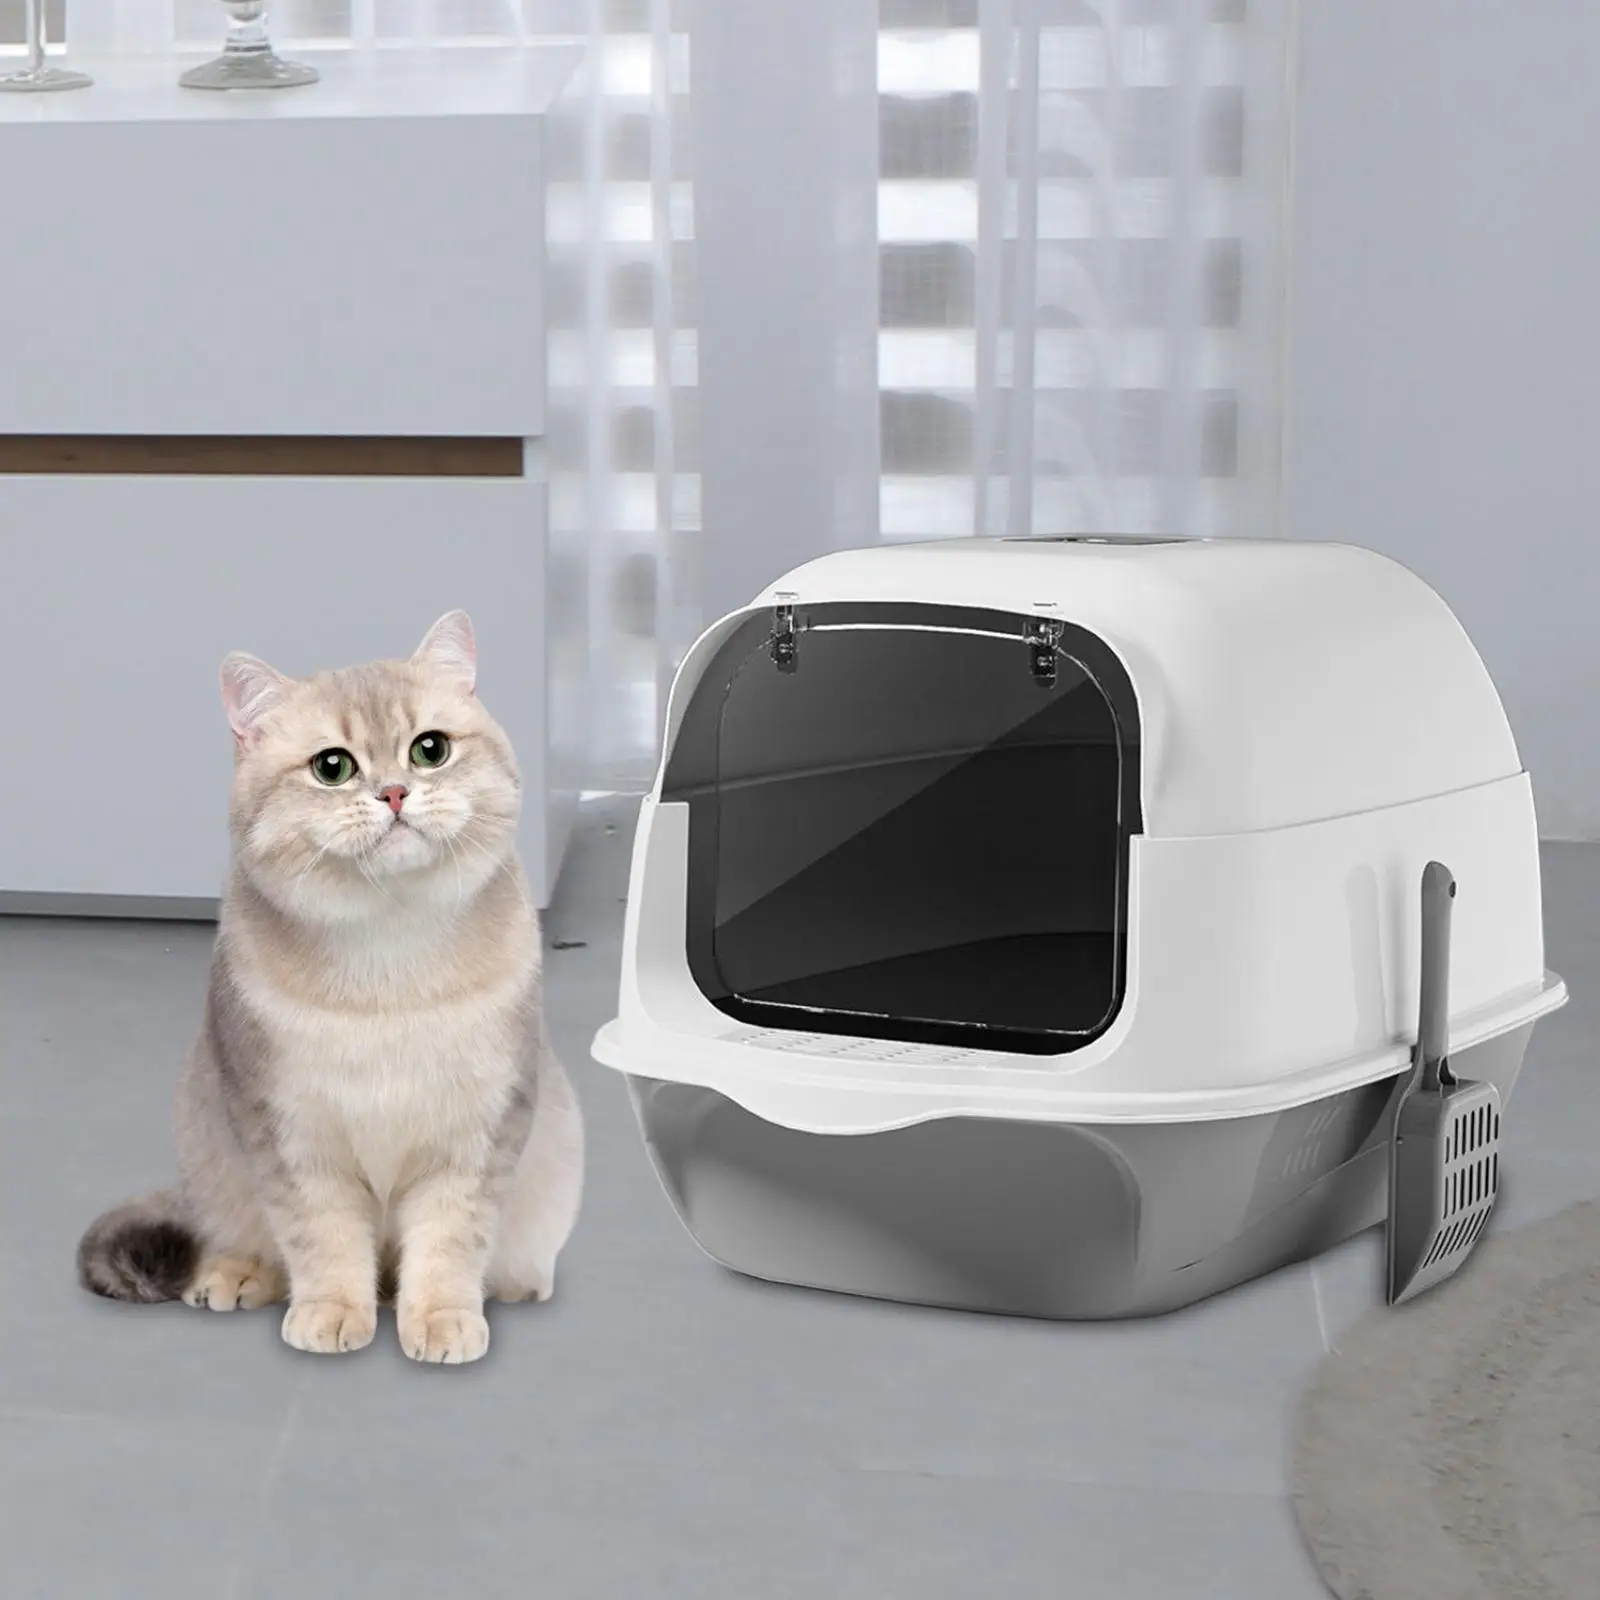 Hooded Cat Litter Box with Lid Enclosed and Covered Cat Toilet Anti Splashing with Shovel Large for Indoor Cats Cat Litter Tray